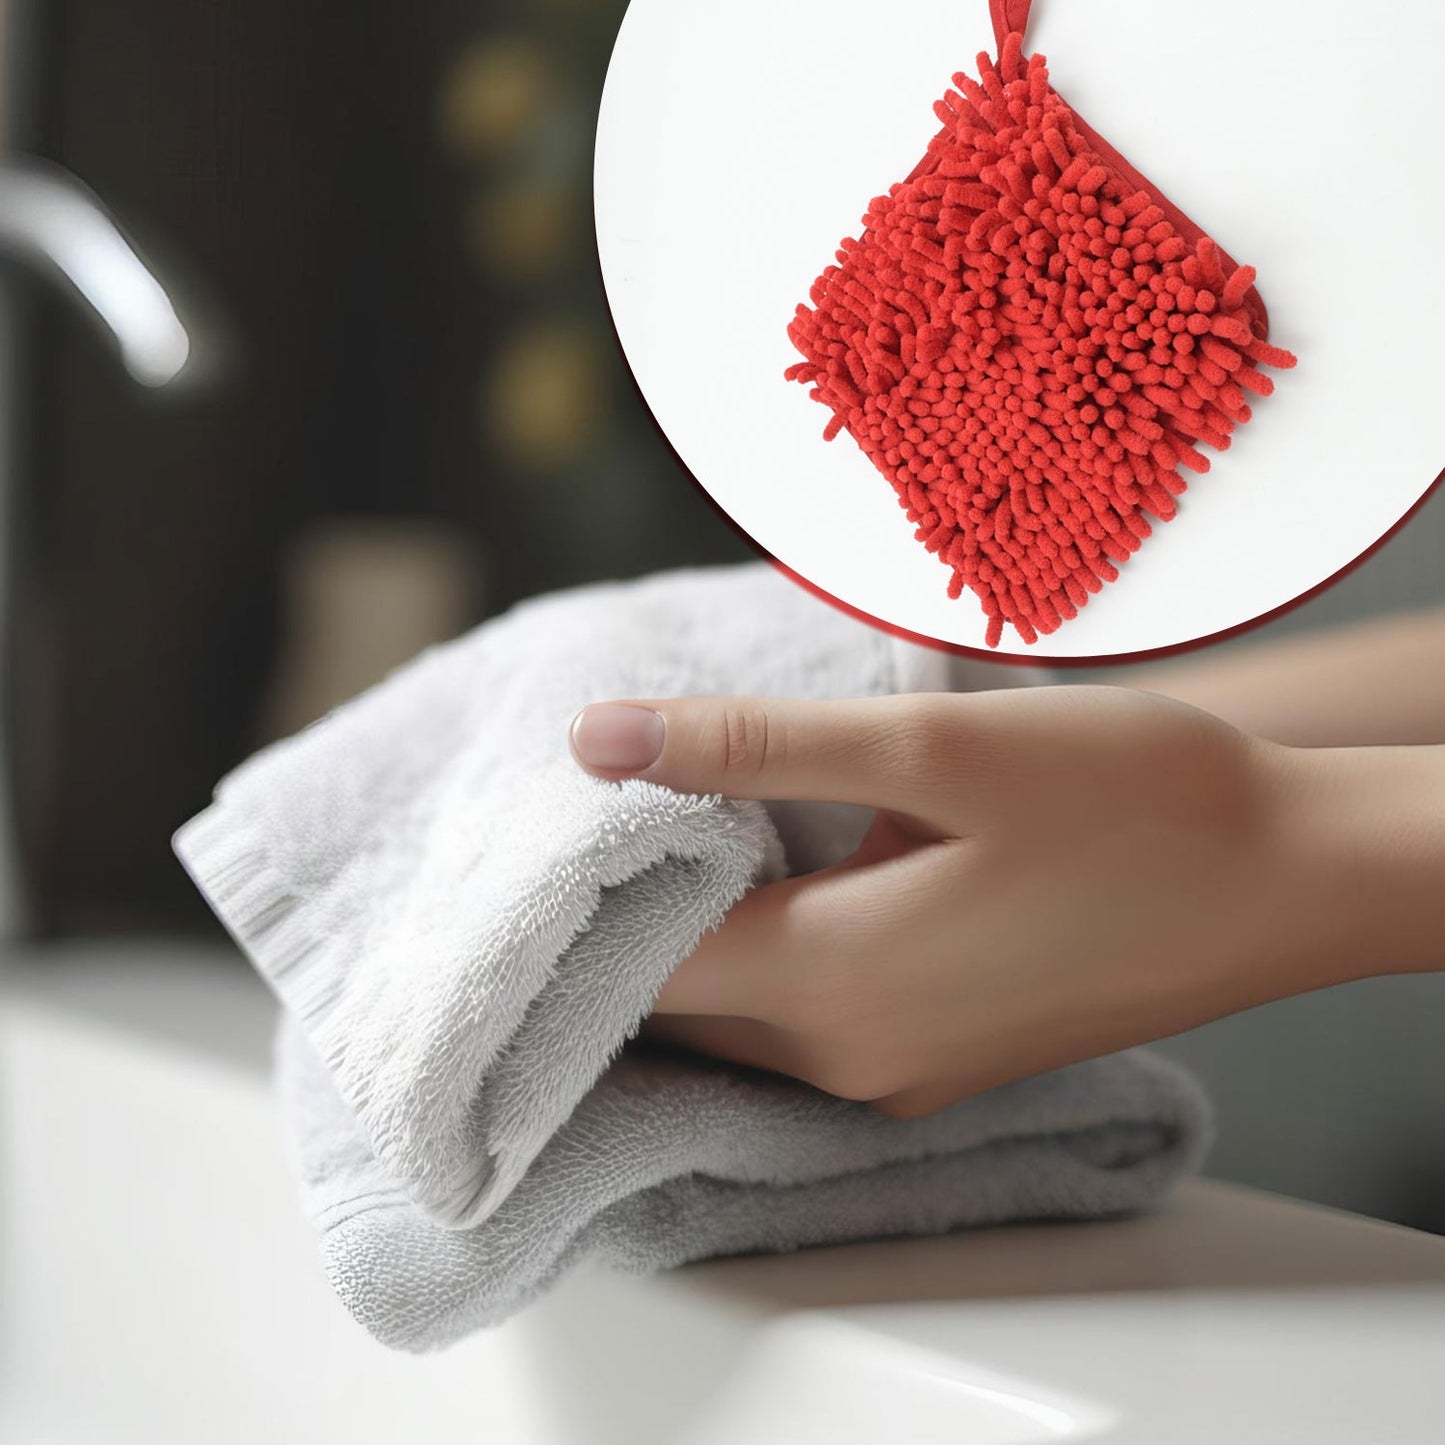 7806 Super Soft Cute Hanging Hand Towel for Kitchen and Bathroom | Ultra Absorbent Thick Coral Velvet Hand Towels with Hanging Loop Fast Drying Microfiber